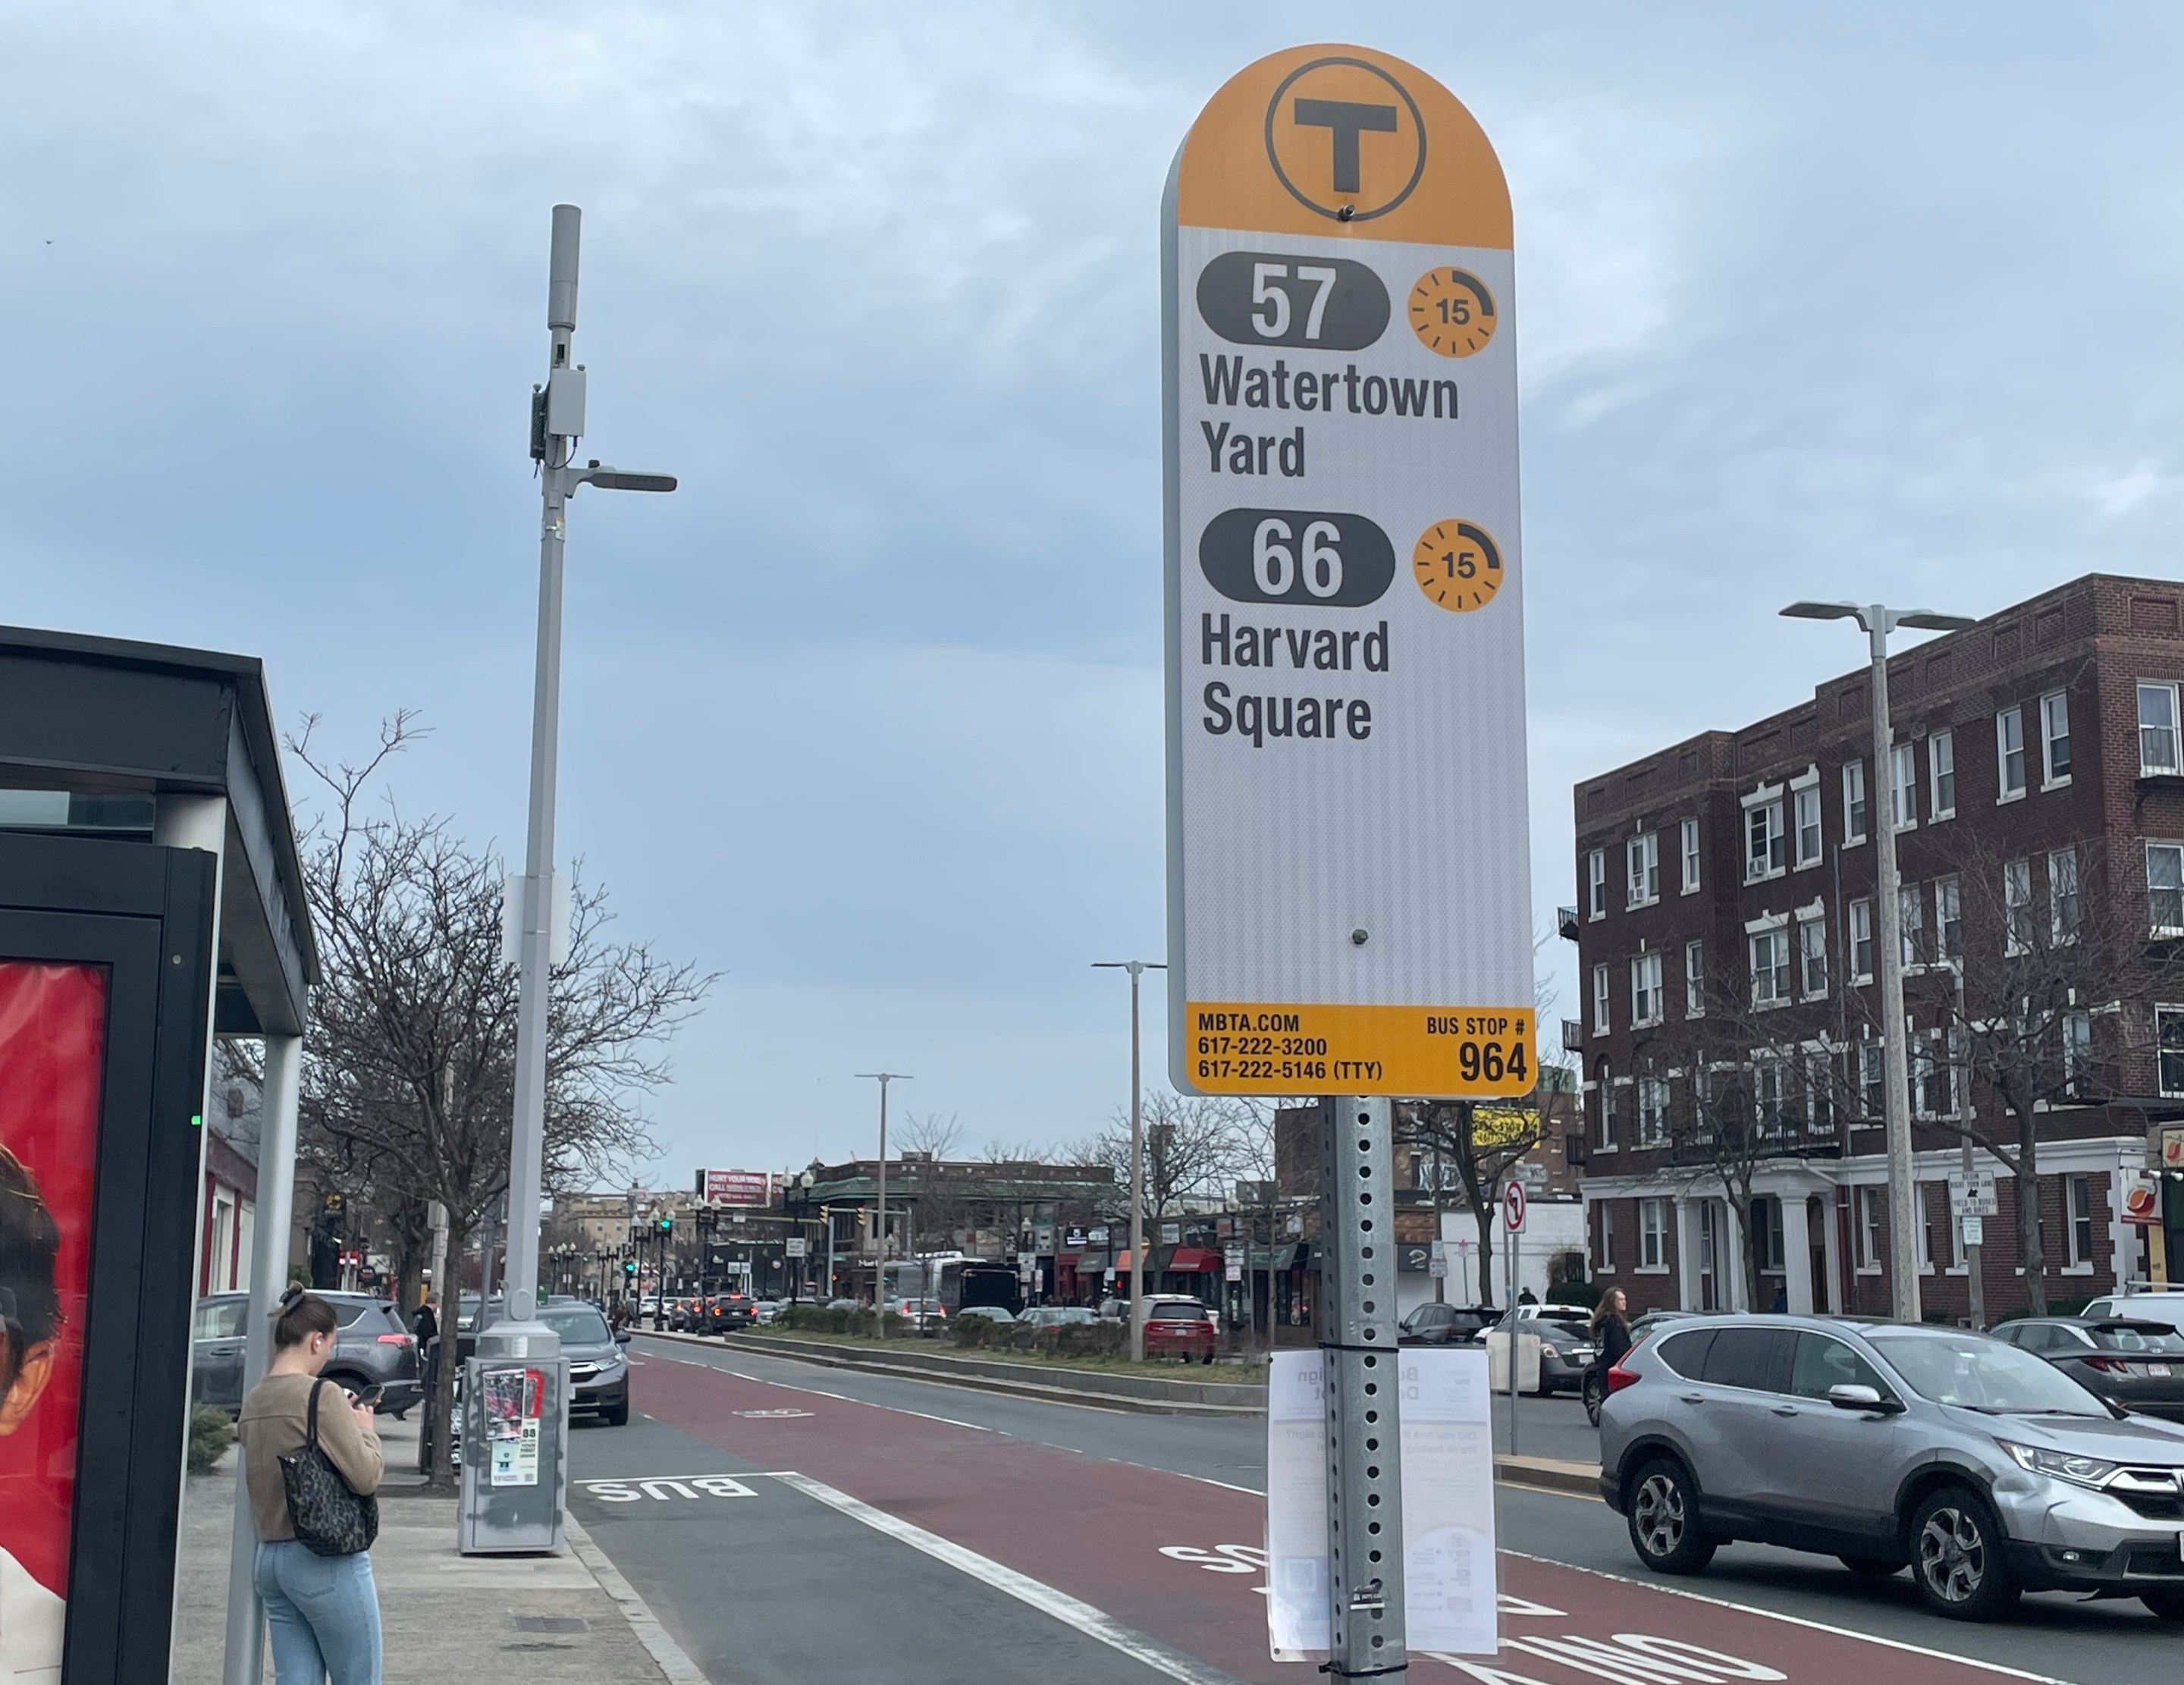 A bus stop sign next to a bus shelter where a passenger is waiting shows two bus routes - the 75 to Watertown Yard and the 66 to Harvard Square - next to a yellow clock icon with a "15" in the middle.